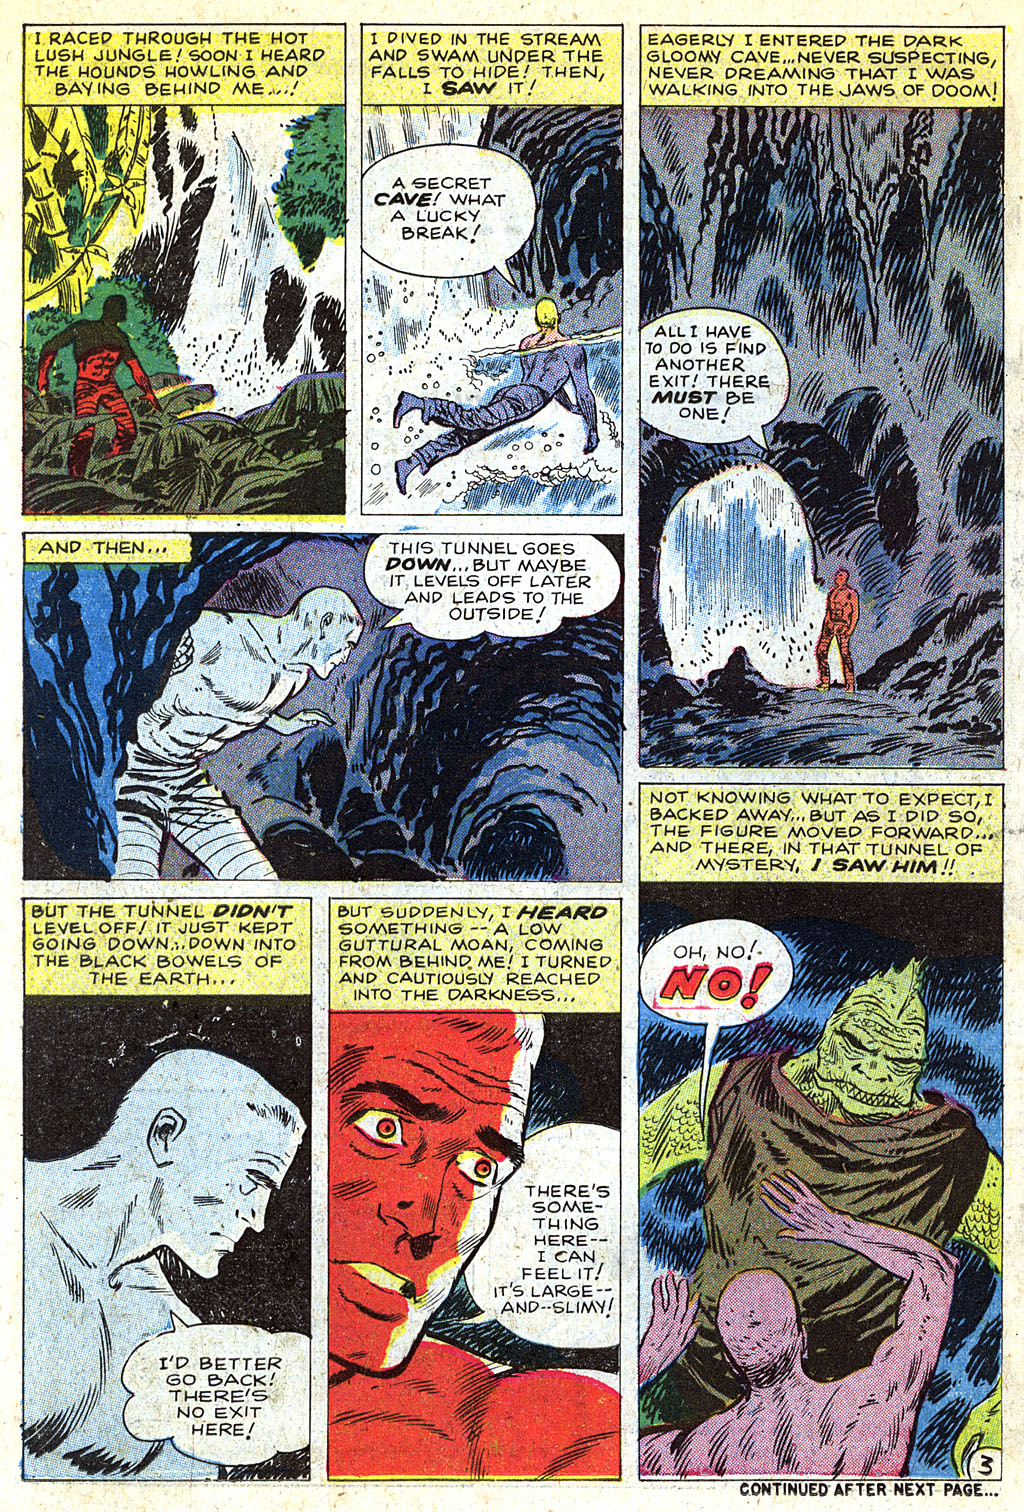 Journey Into Mystery (1952) 64 Page 13